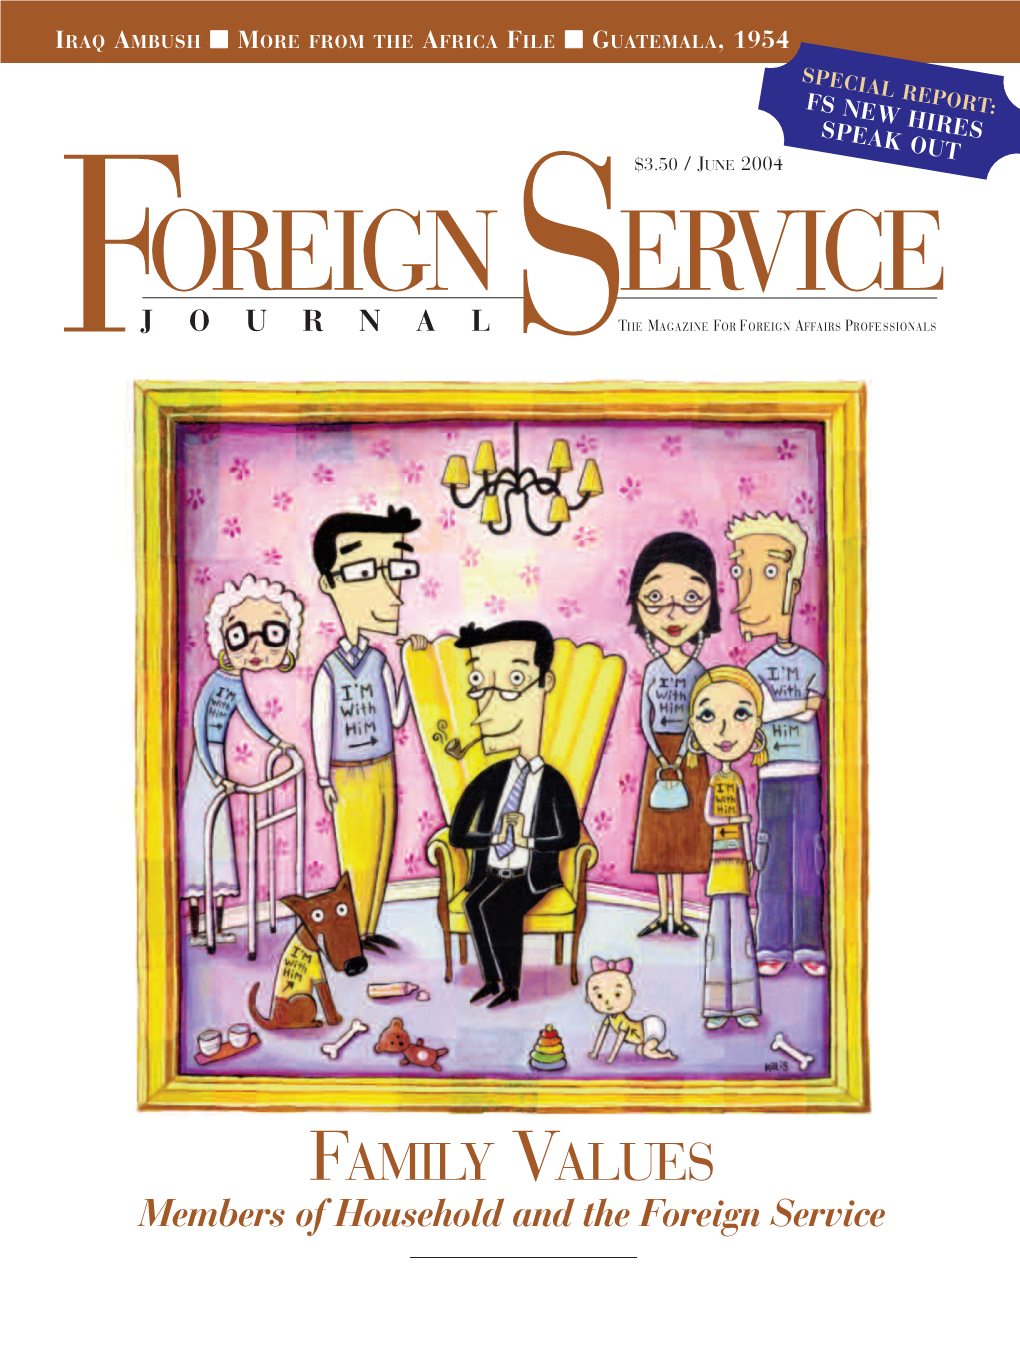 The Foreign Service Journal, June 2004